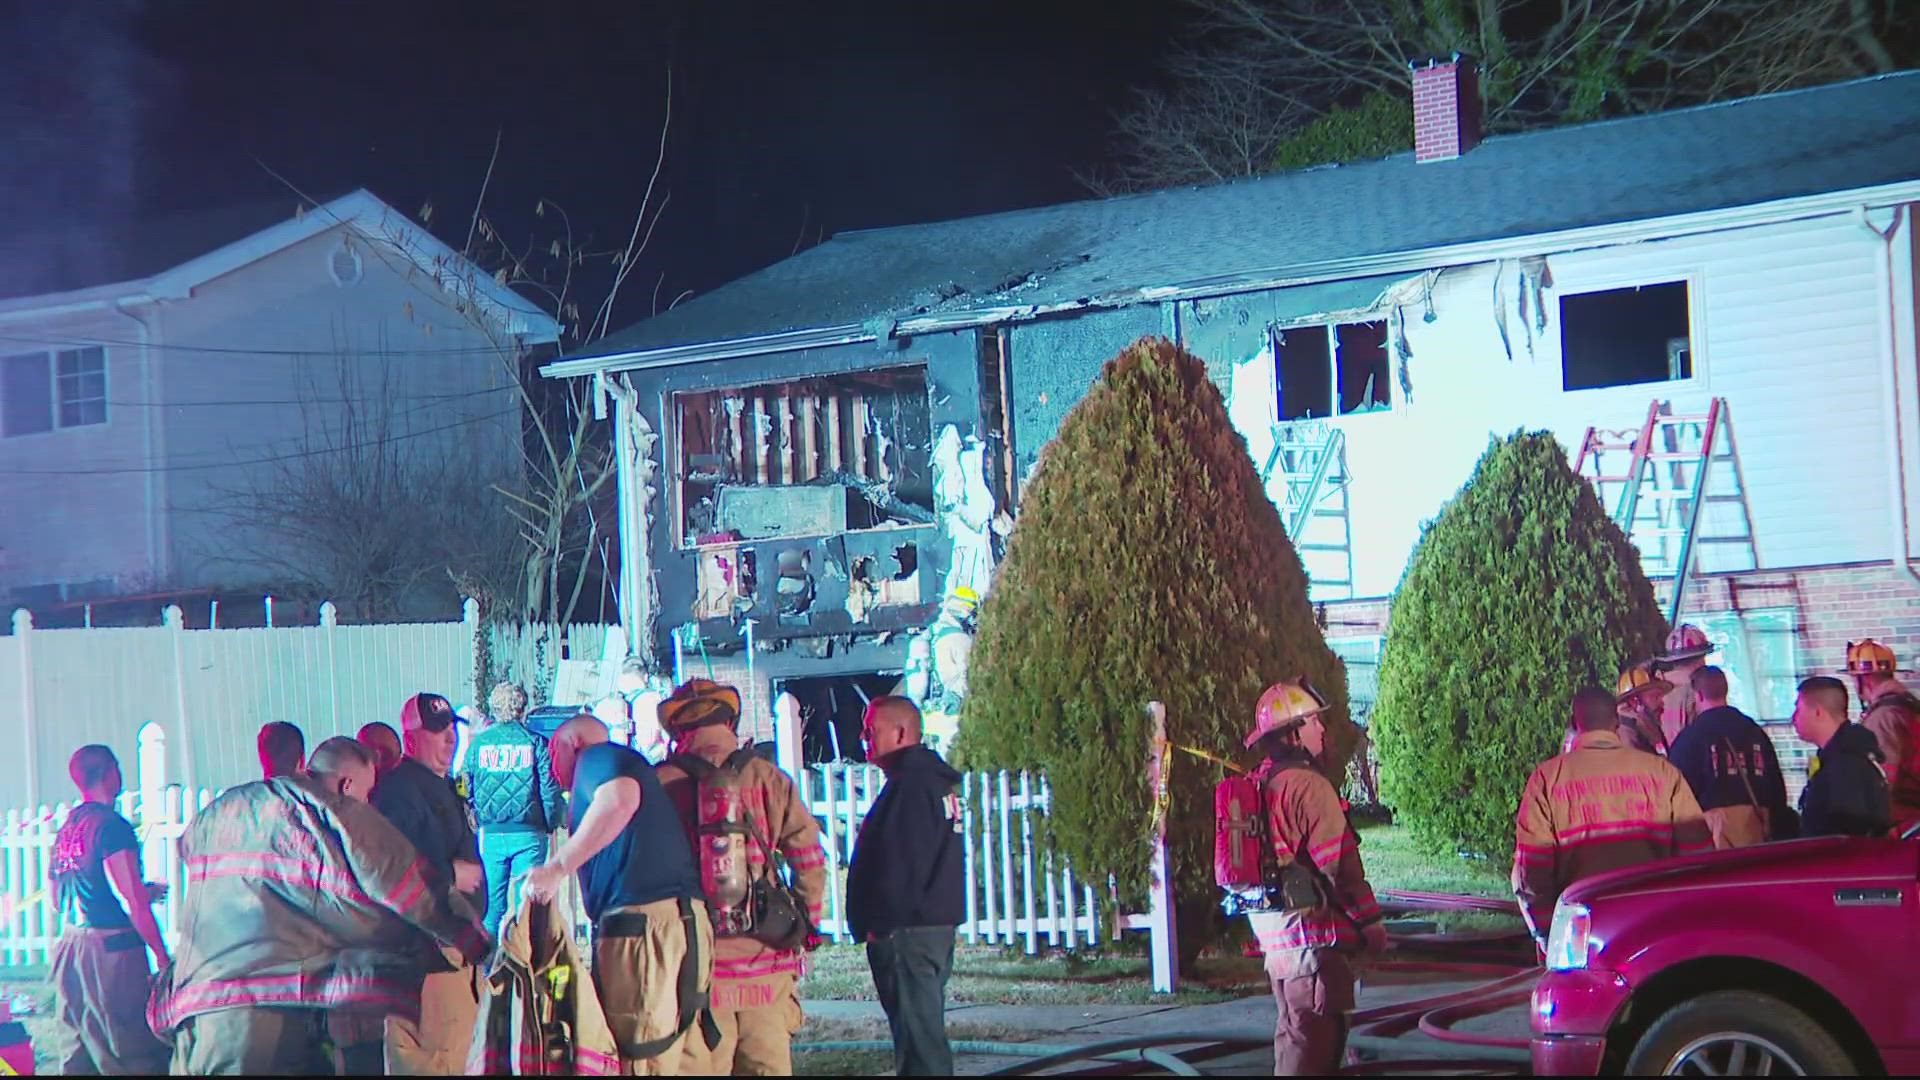 Two people are dead after a massive fire broke out at a two-story Montgomery County home late Monday night.